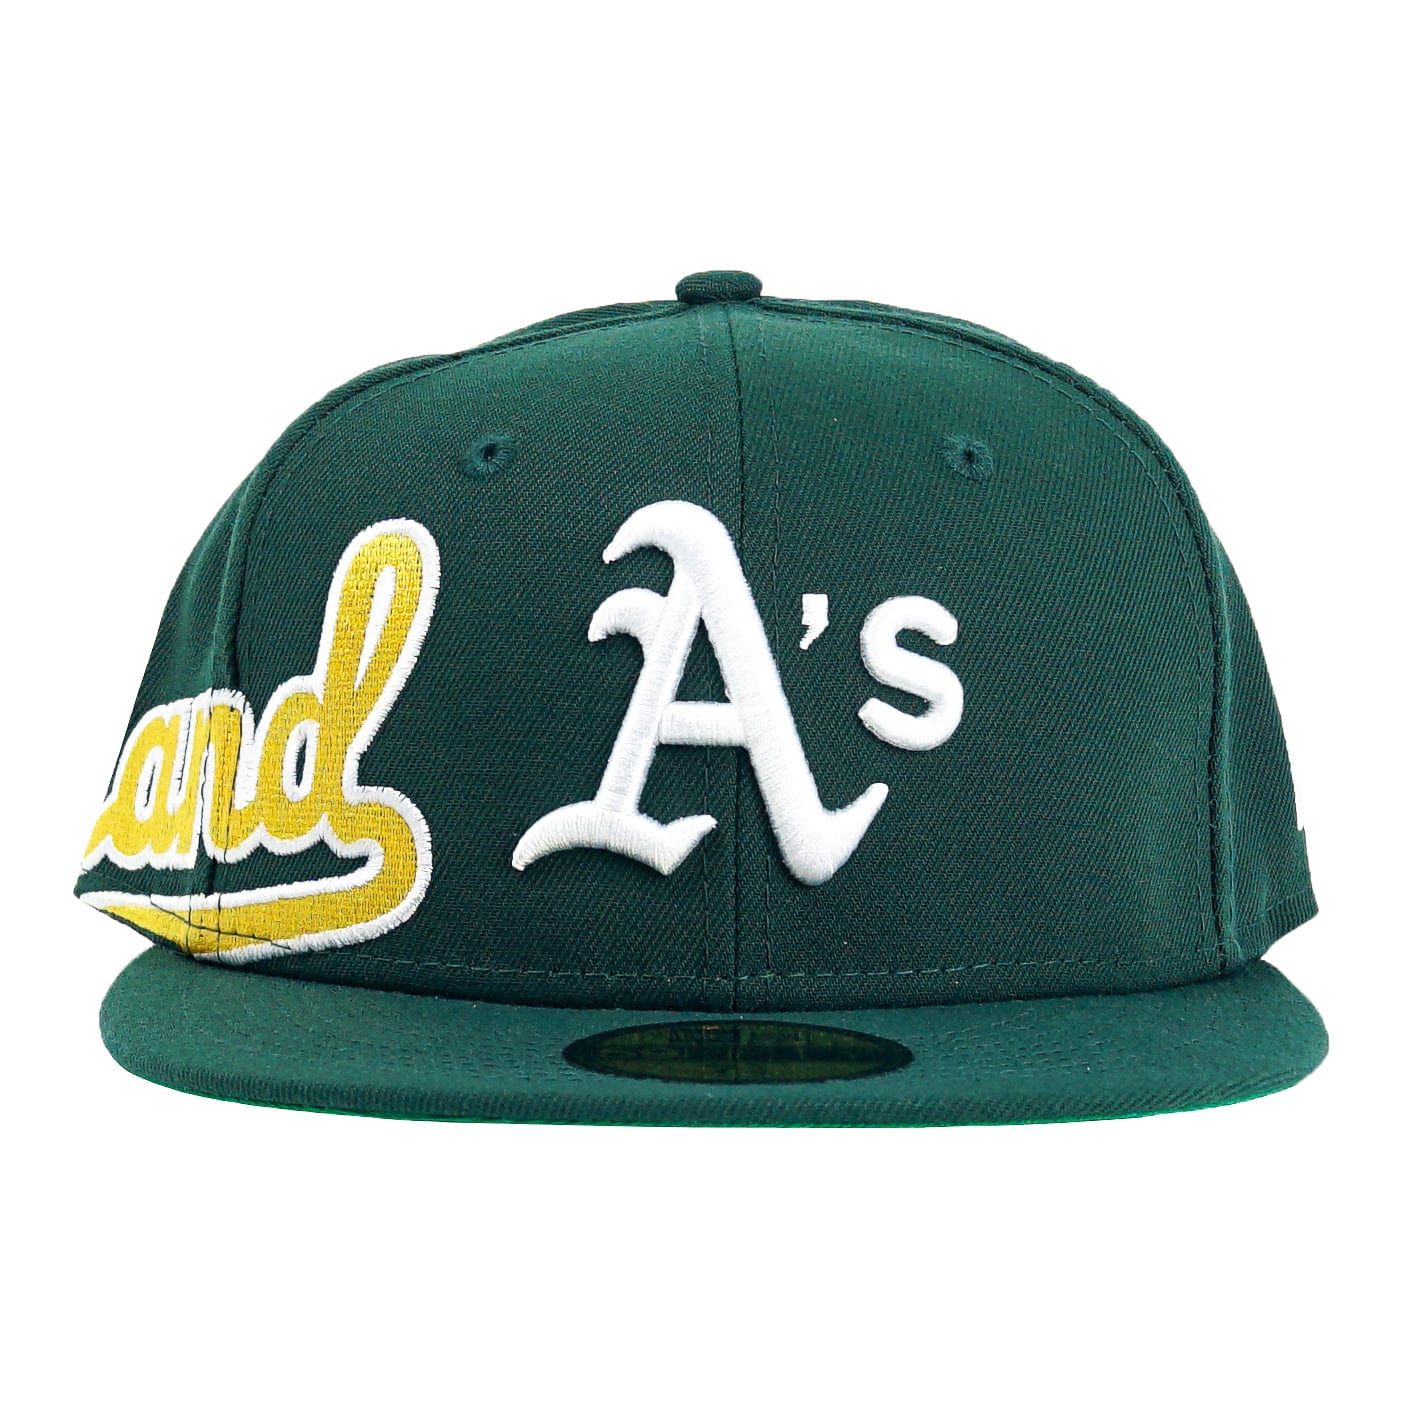 Oakland Athletics Sidesplit 59Fifty Fitted Hat in green